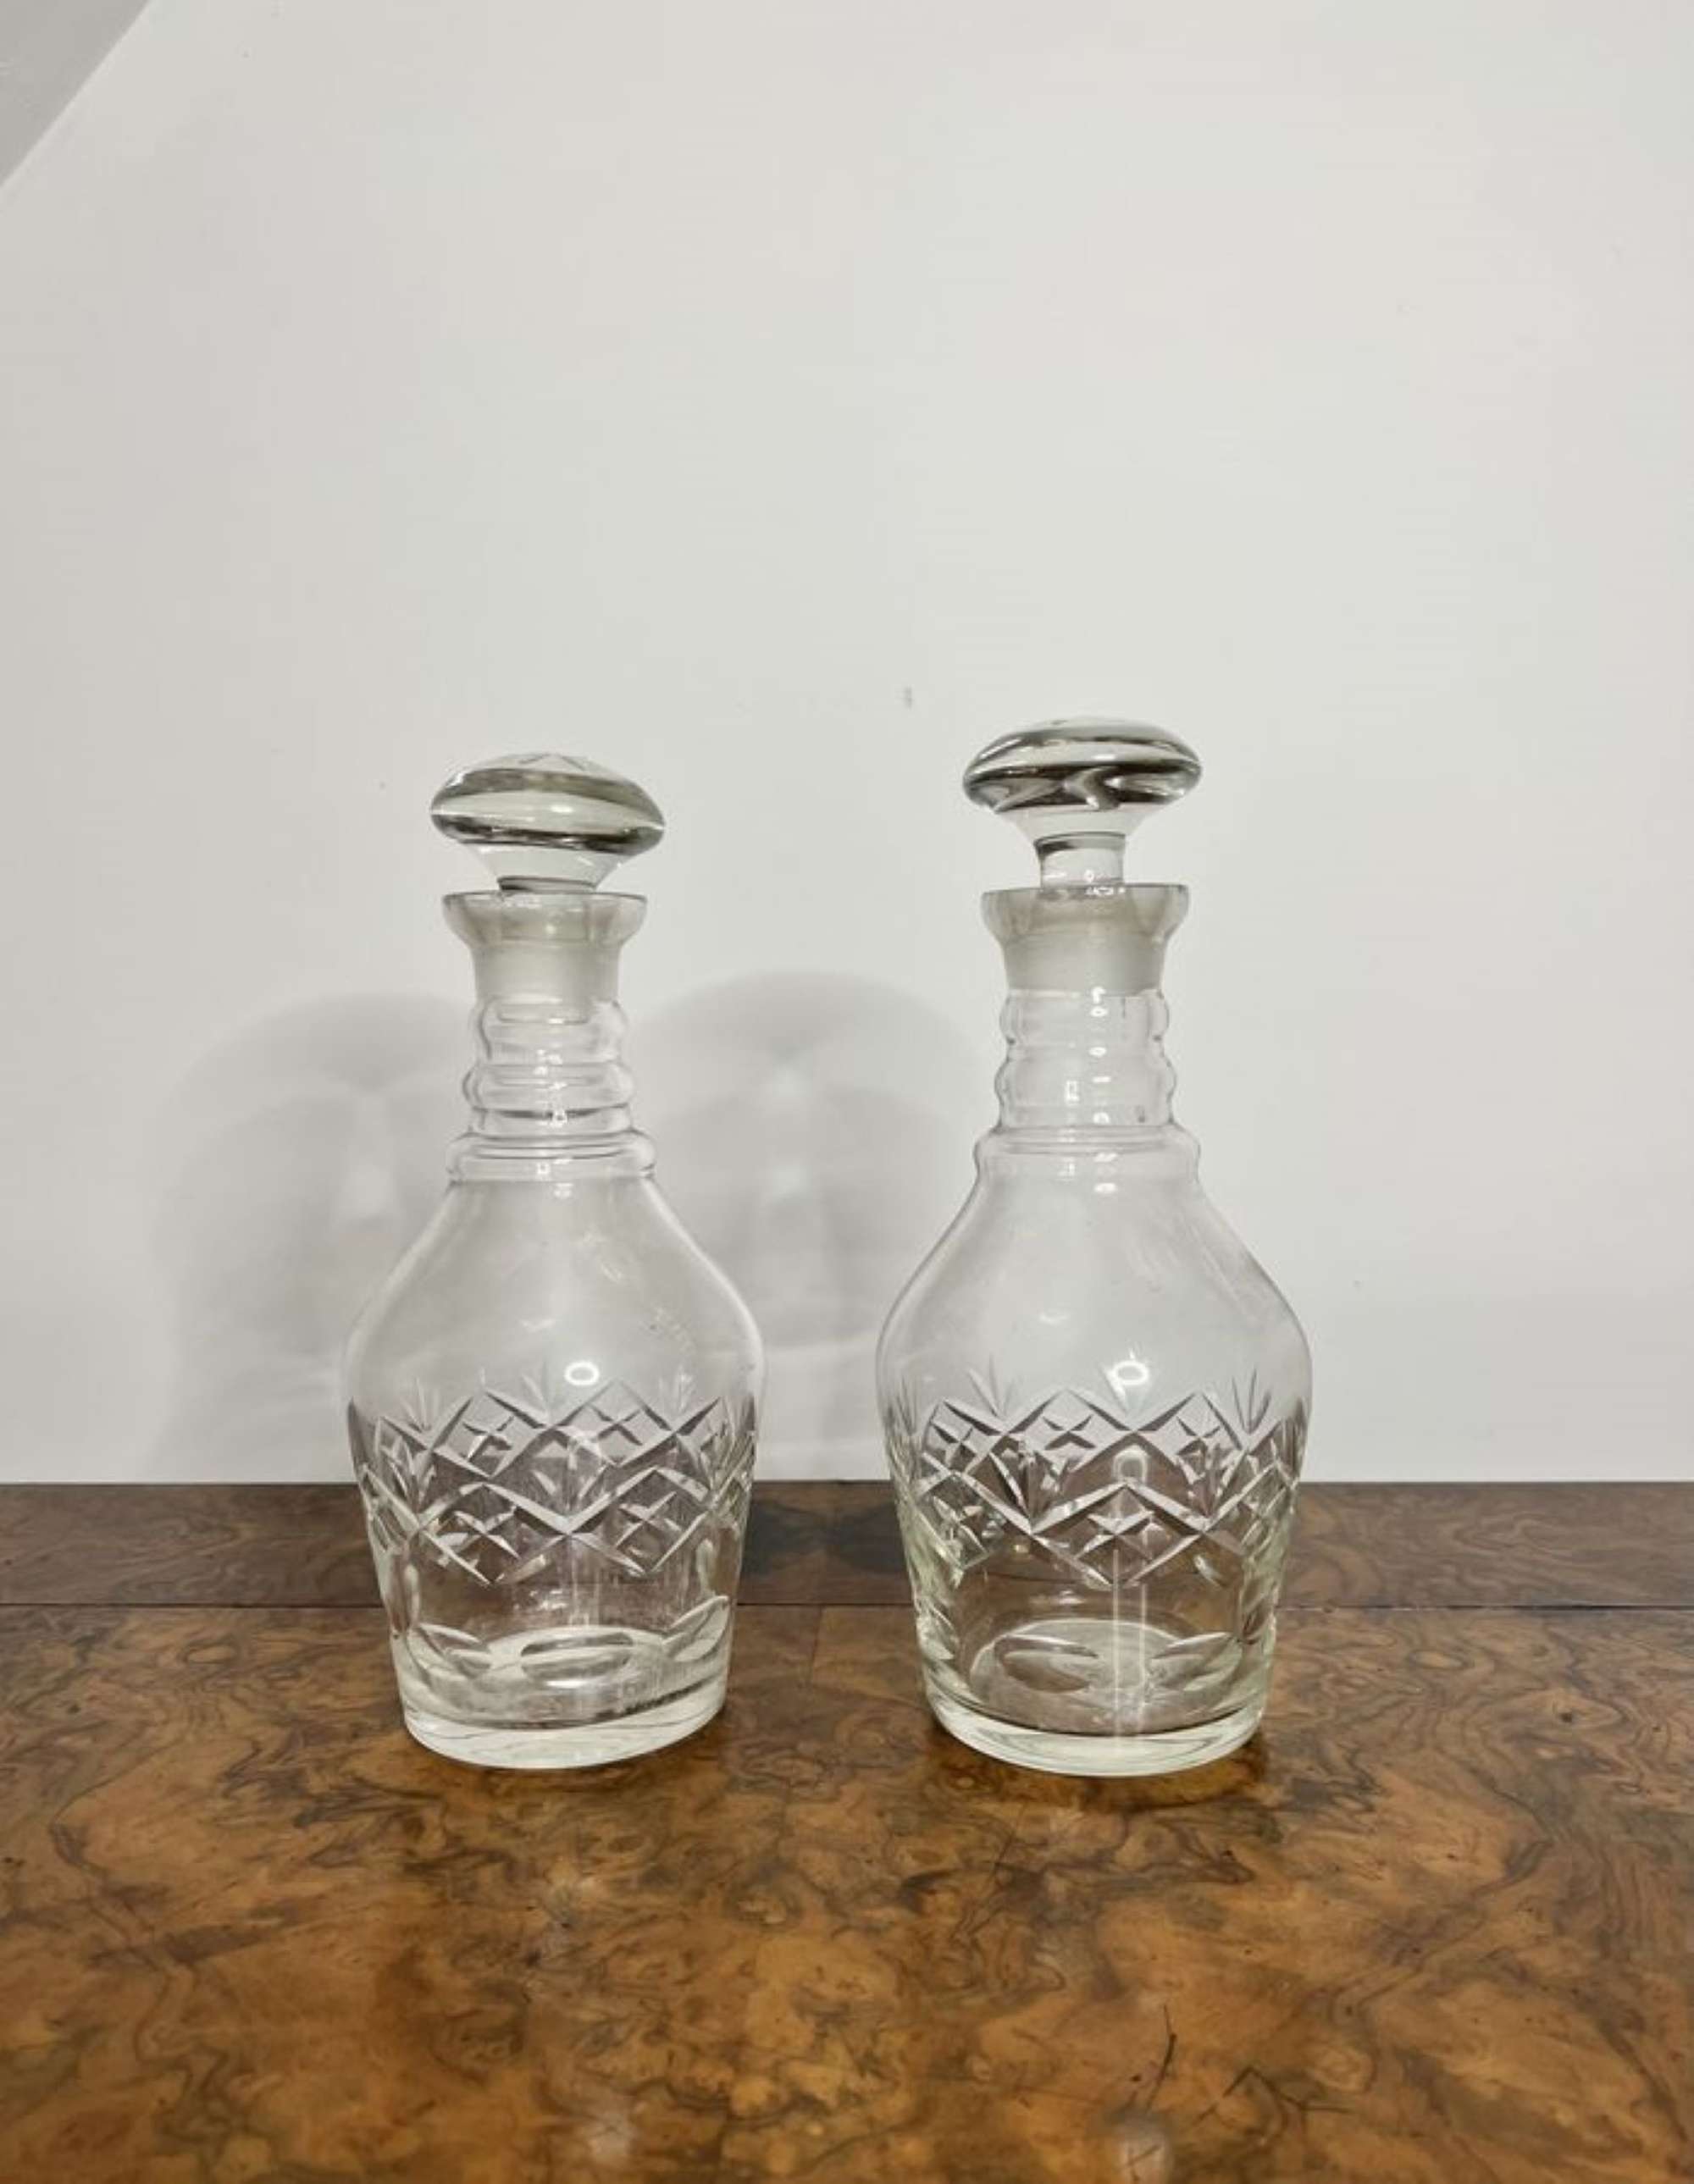 Wonderful pair of antique Victorian cut glass decanters